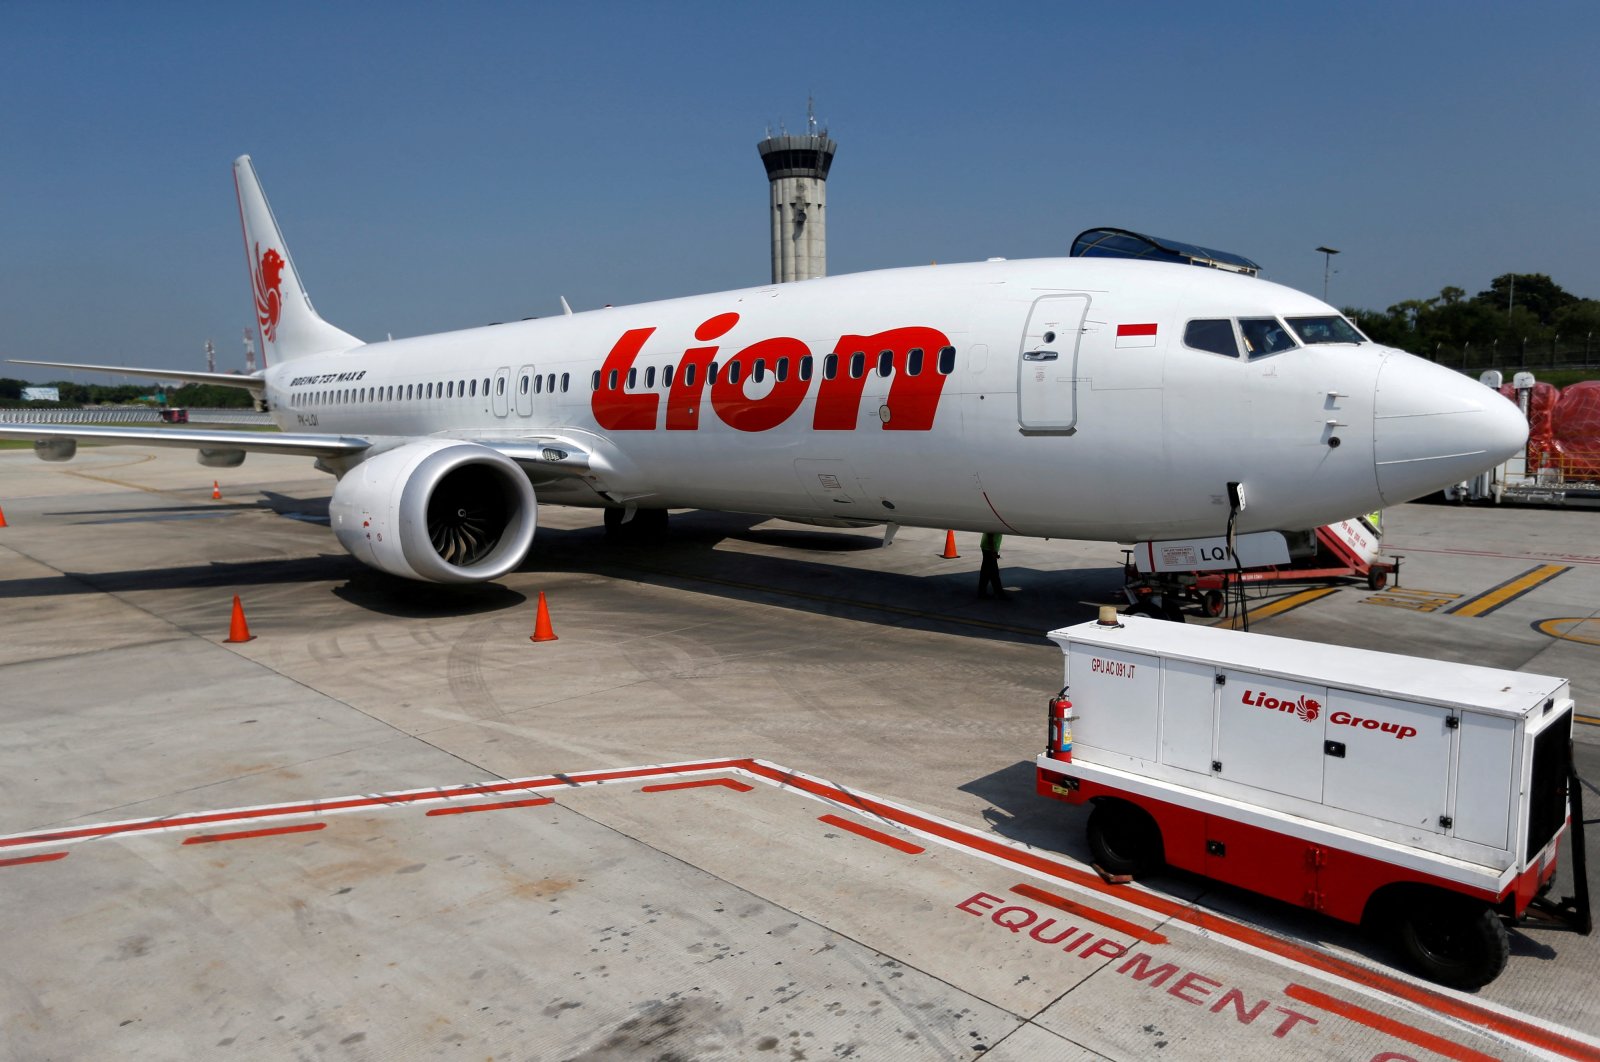 A Lion Air Boeing 737 Max 8 airplane is parked on the tarmac of Soekarno Hatta International airport near Jakarta, Indonesia, March 15, 2019. (Reuters Photo)